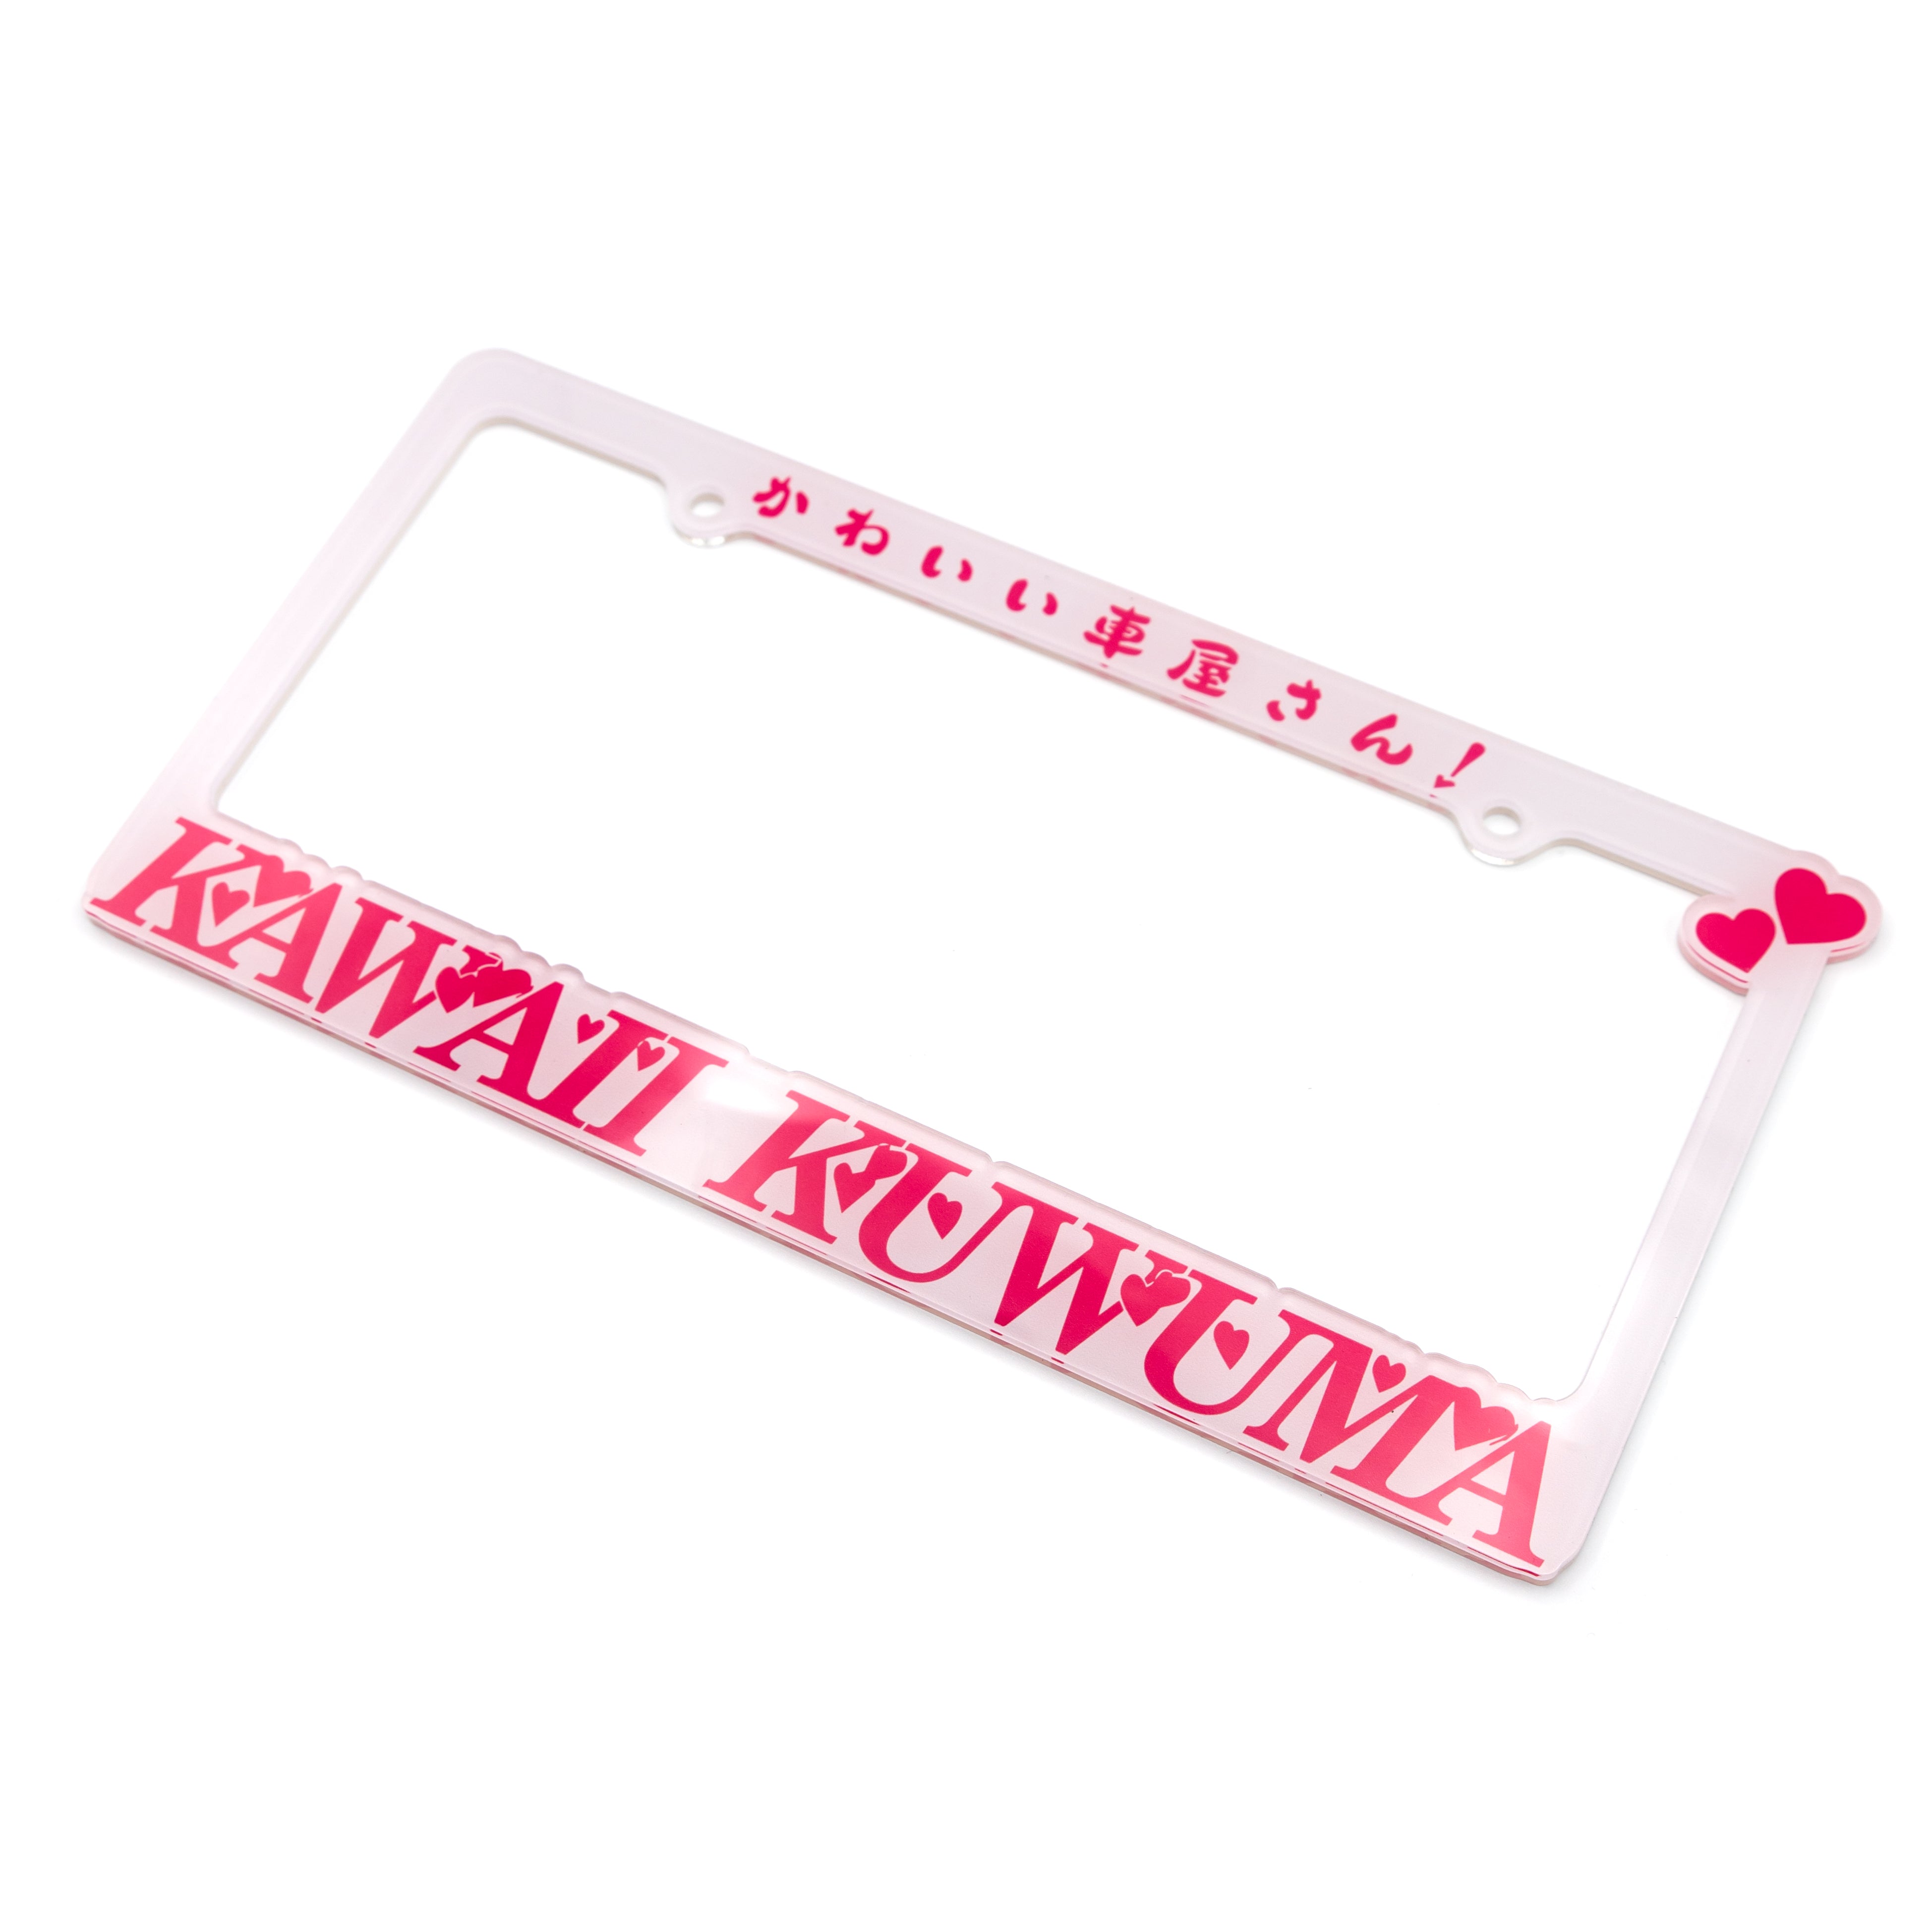 Amazon.com: meiystyle Sailor Moon License Plate Frame Anime License Plate  Frame American Standard License Plate 12.3x6.3 Inch 2pcs, 5 : Automotive